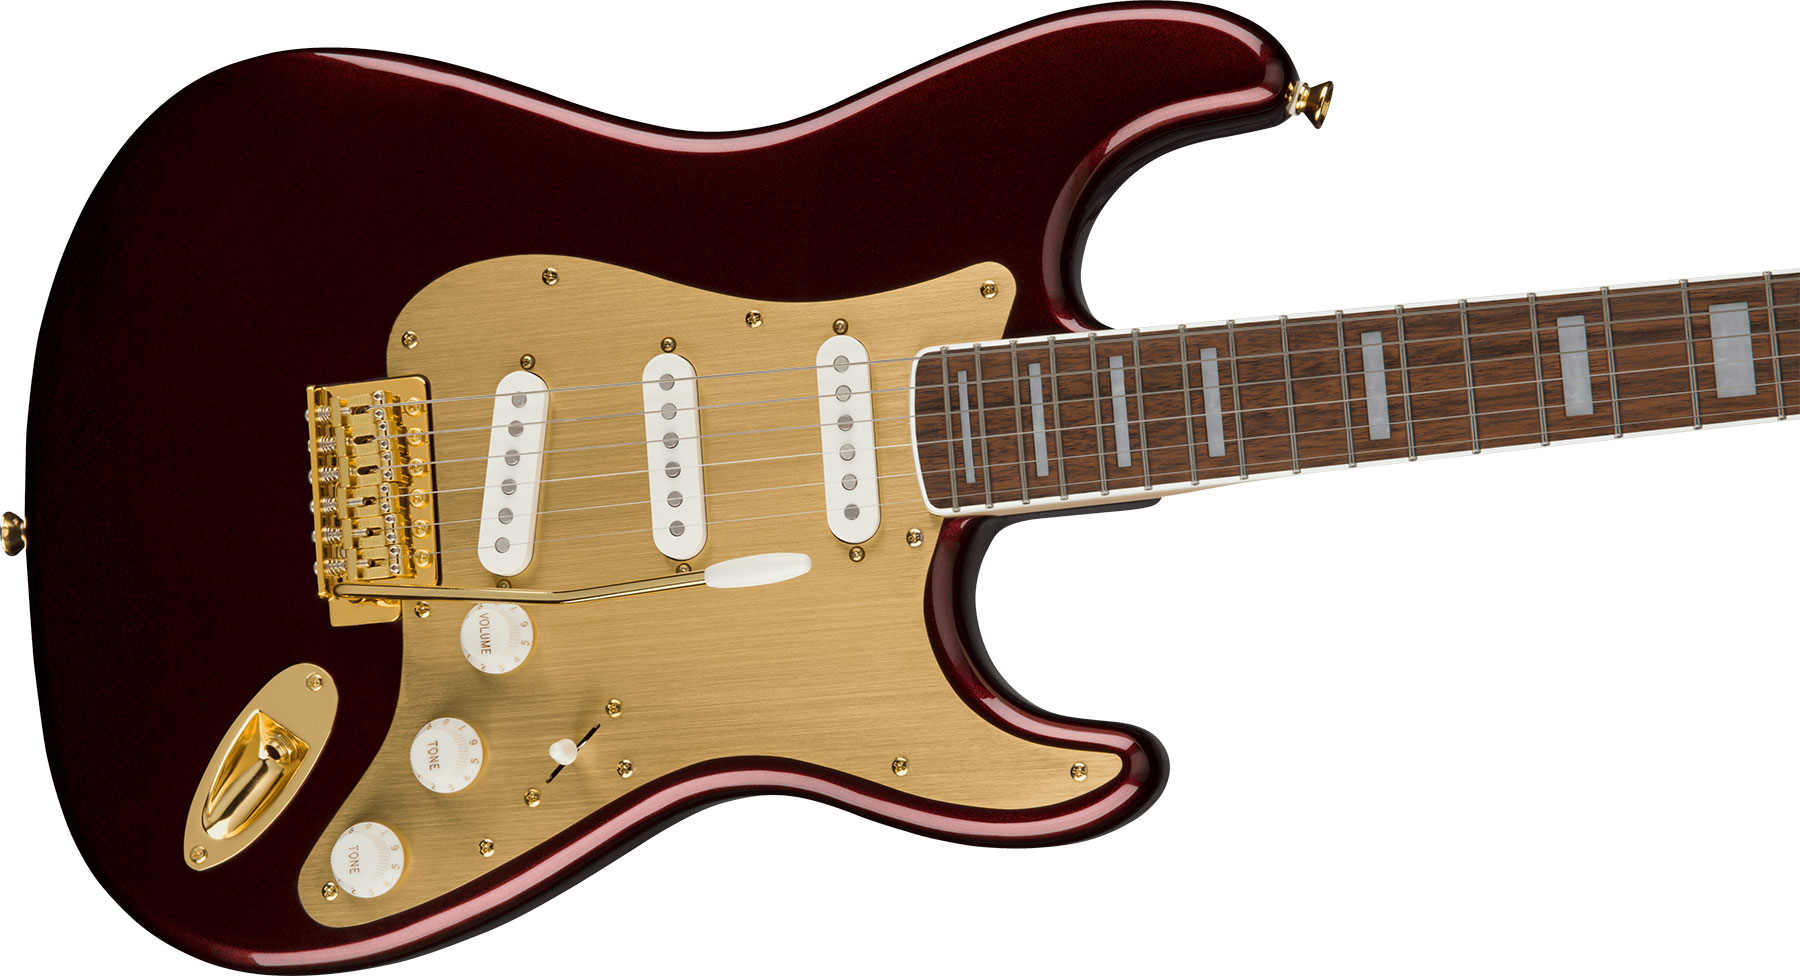 Squier Strat 40th Anniversary Gold Edition Lau - Ruby Red Metallic - Guitare Électrique Forme Str - Variation 2